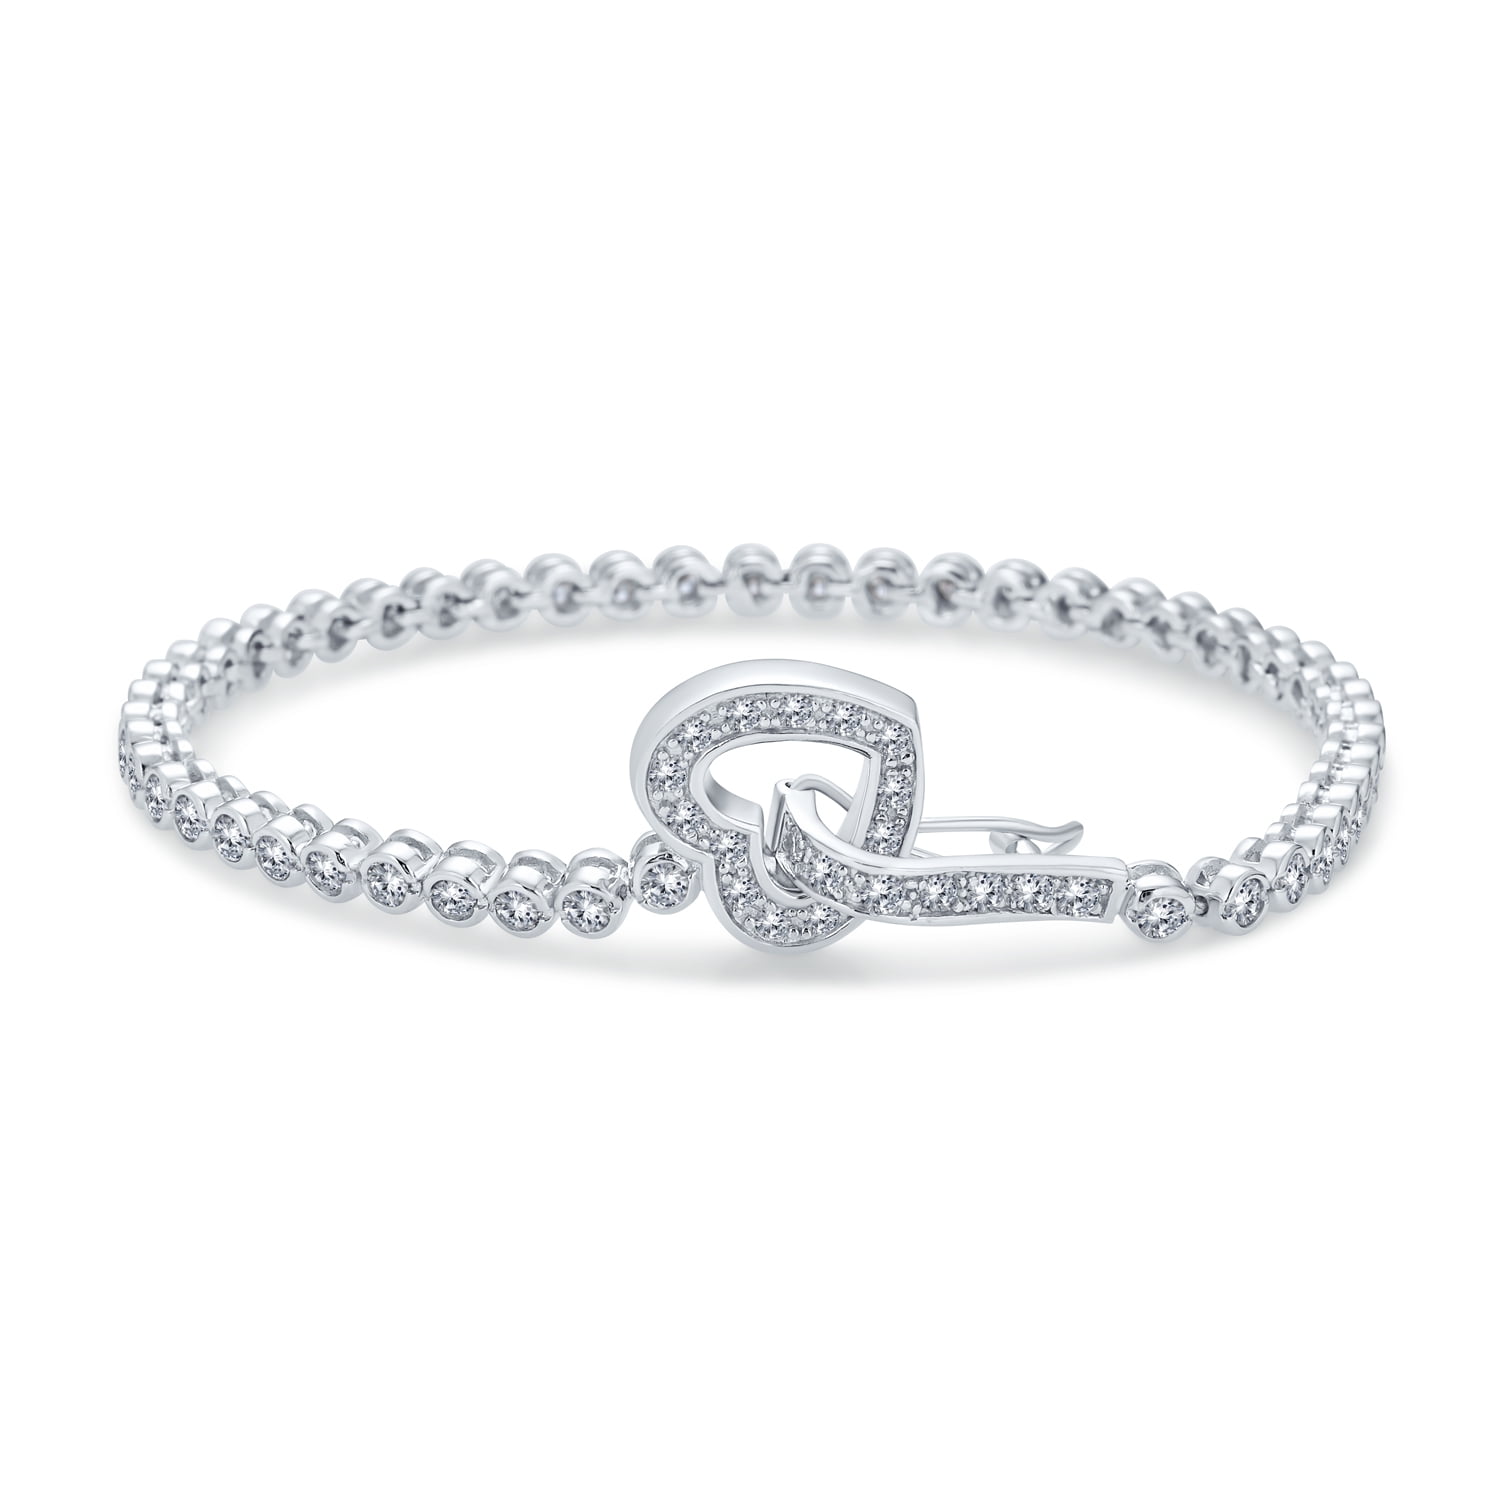 Round Aaa White Cubic Zirconia 925 Sterling Silver Bracelet 7.5 Inches 